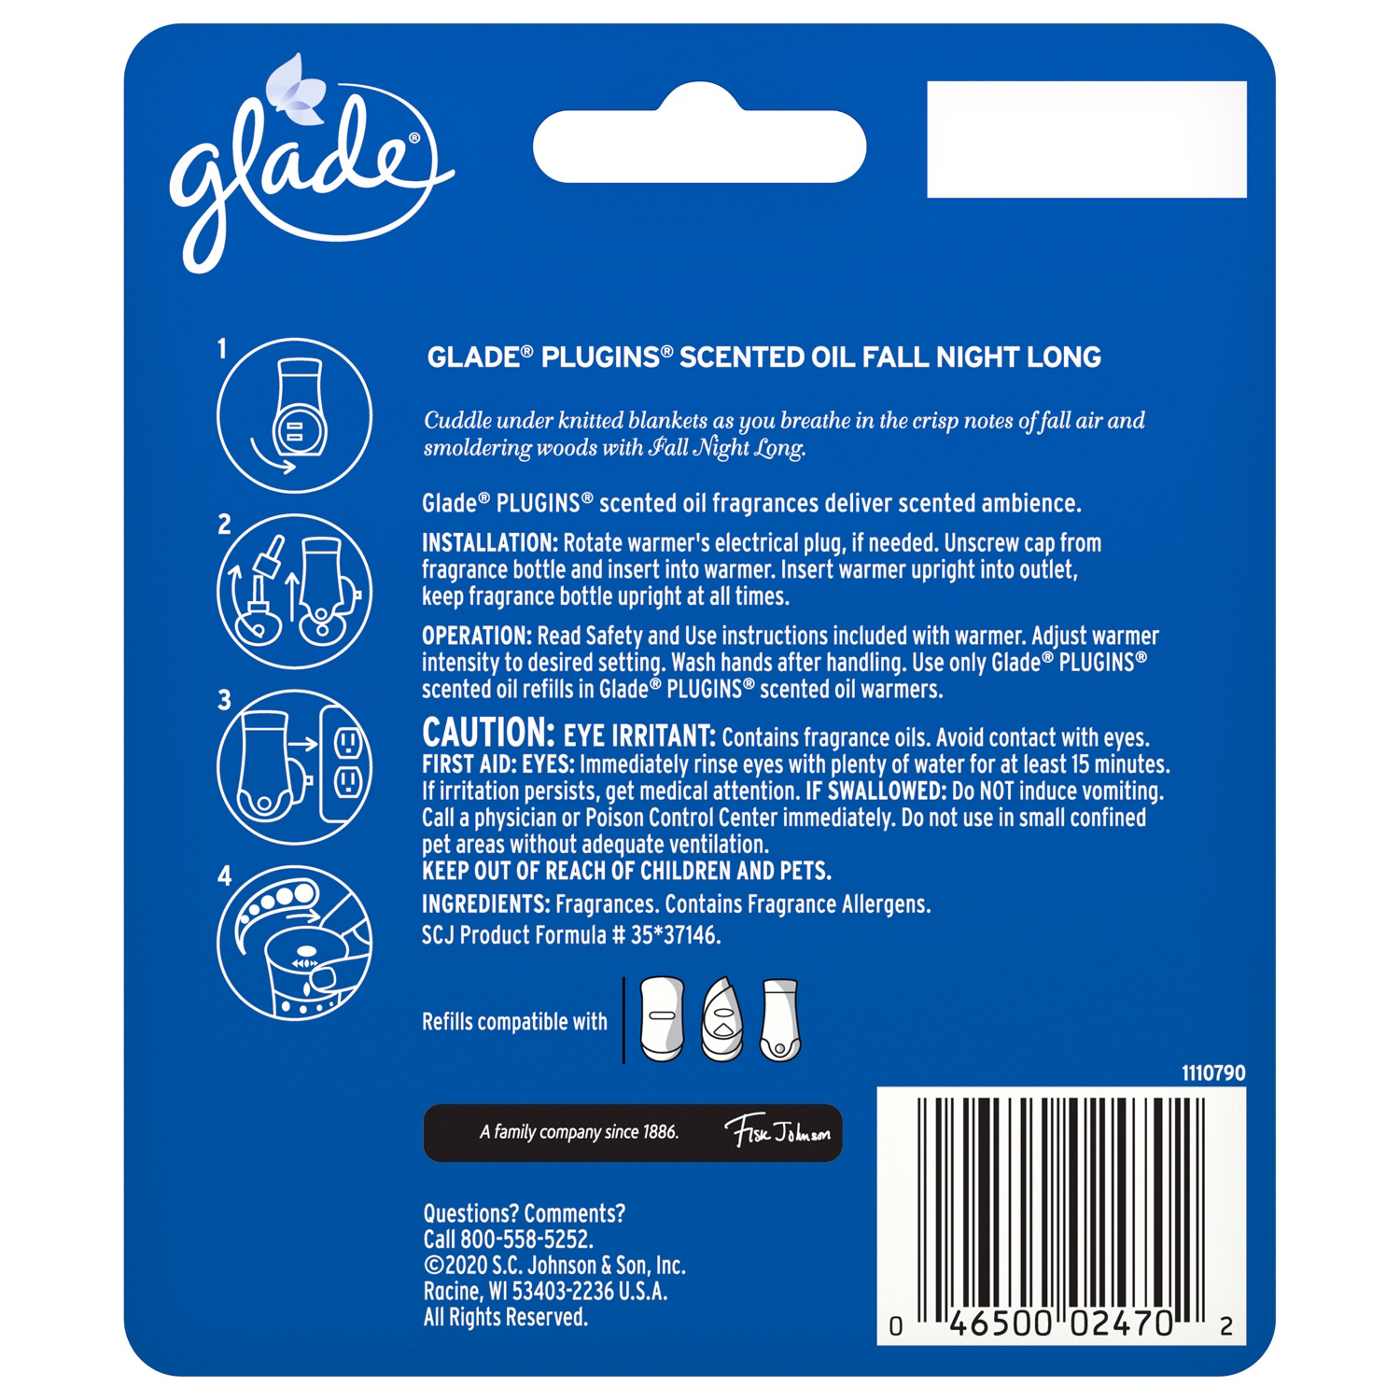 Glade PlugIns Scented Oil Air Freshener Refills - Fall Night Long; image 3 of 3